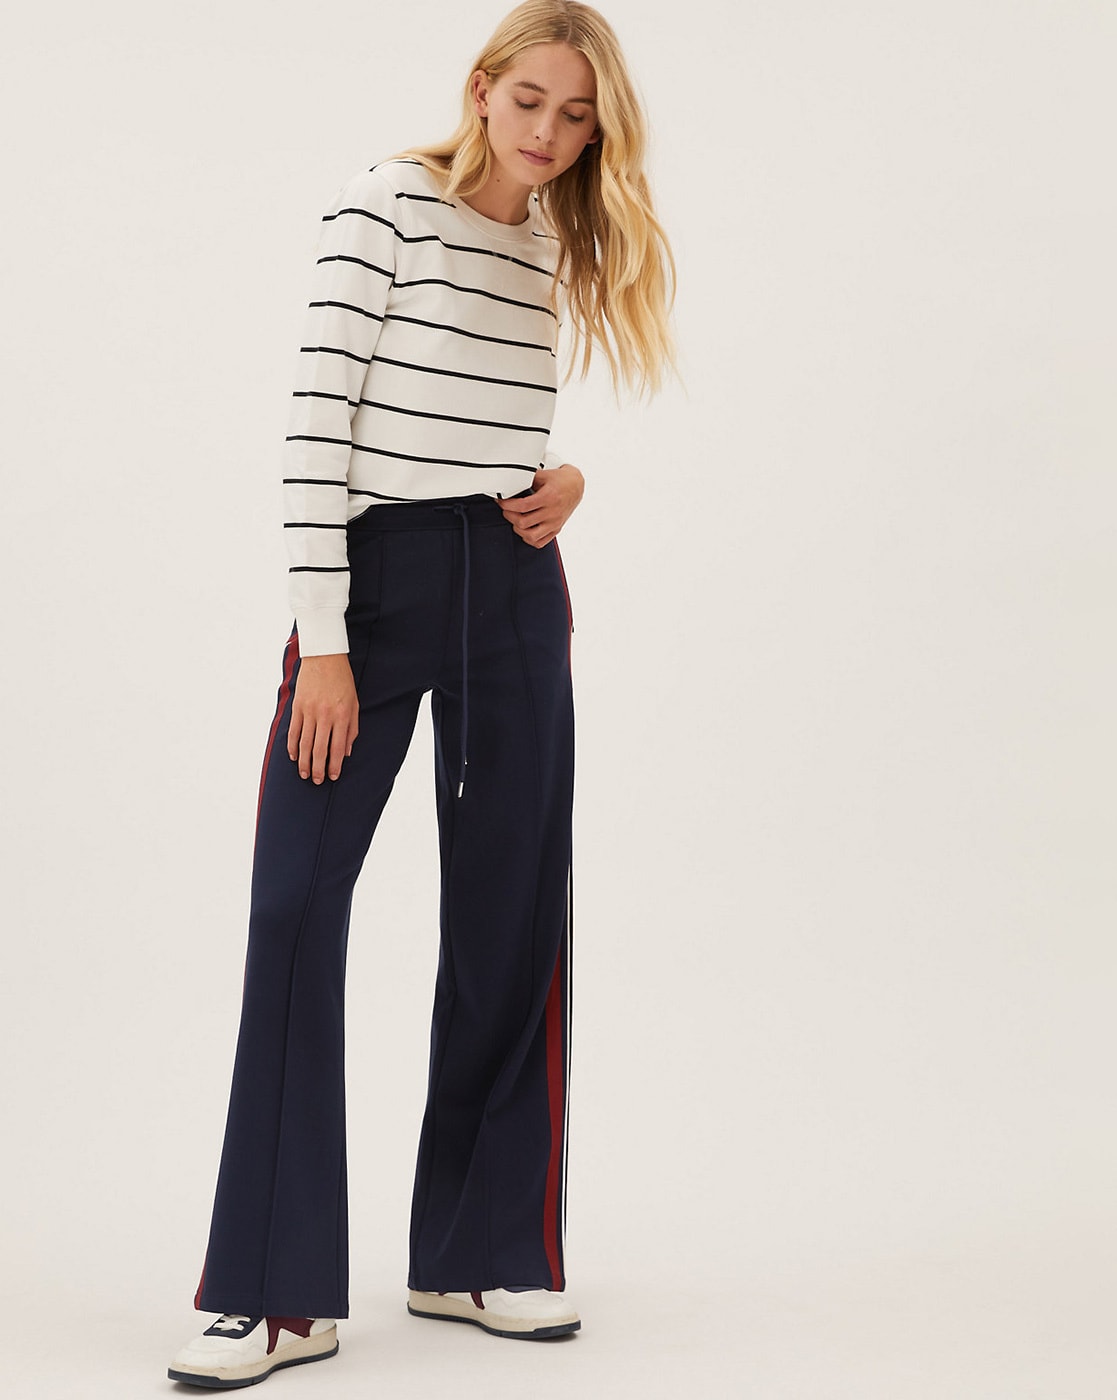 Buy Marks  Spencer Women Navy Blue Straight Fit Solid Formal Trousers   Trousers for Women 2023972  Myntra